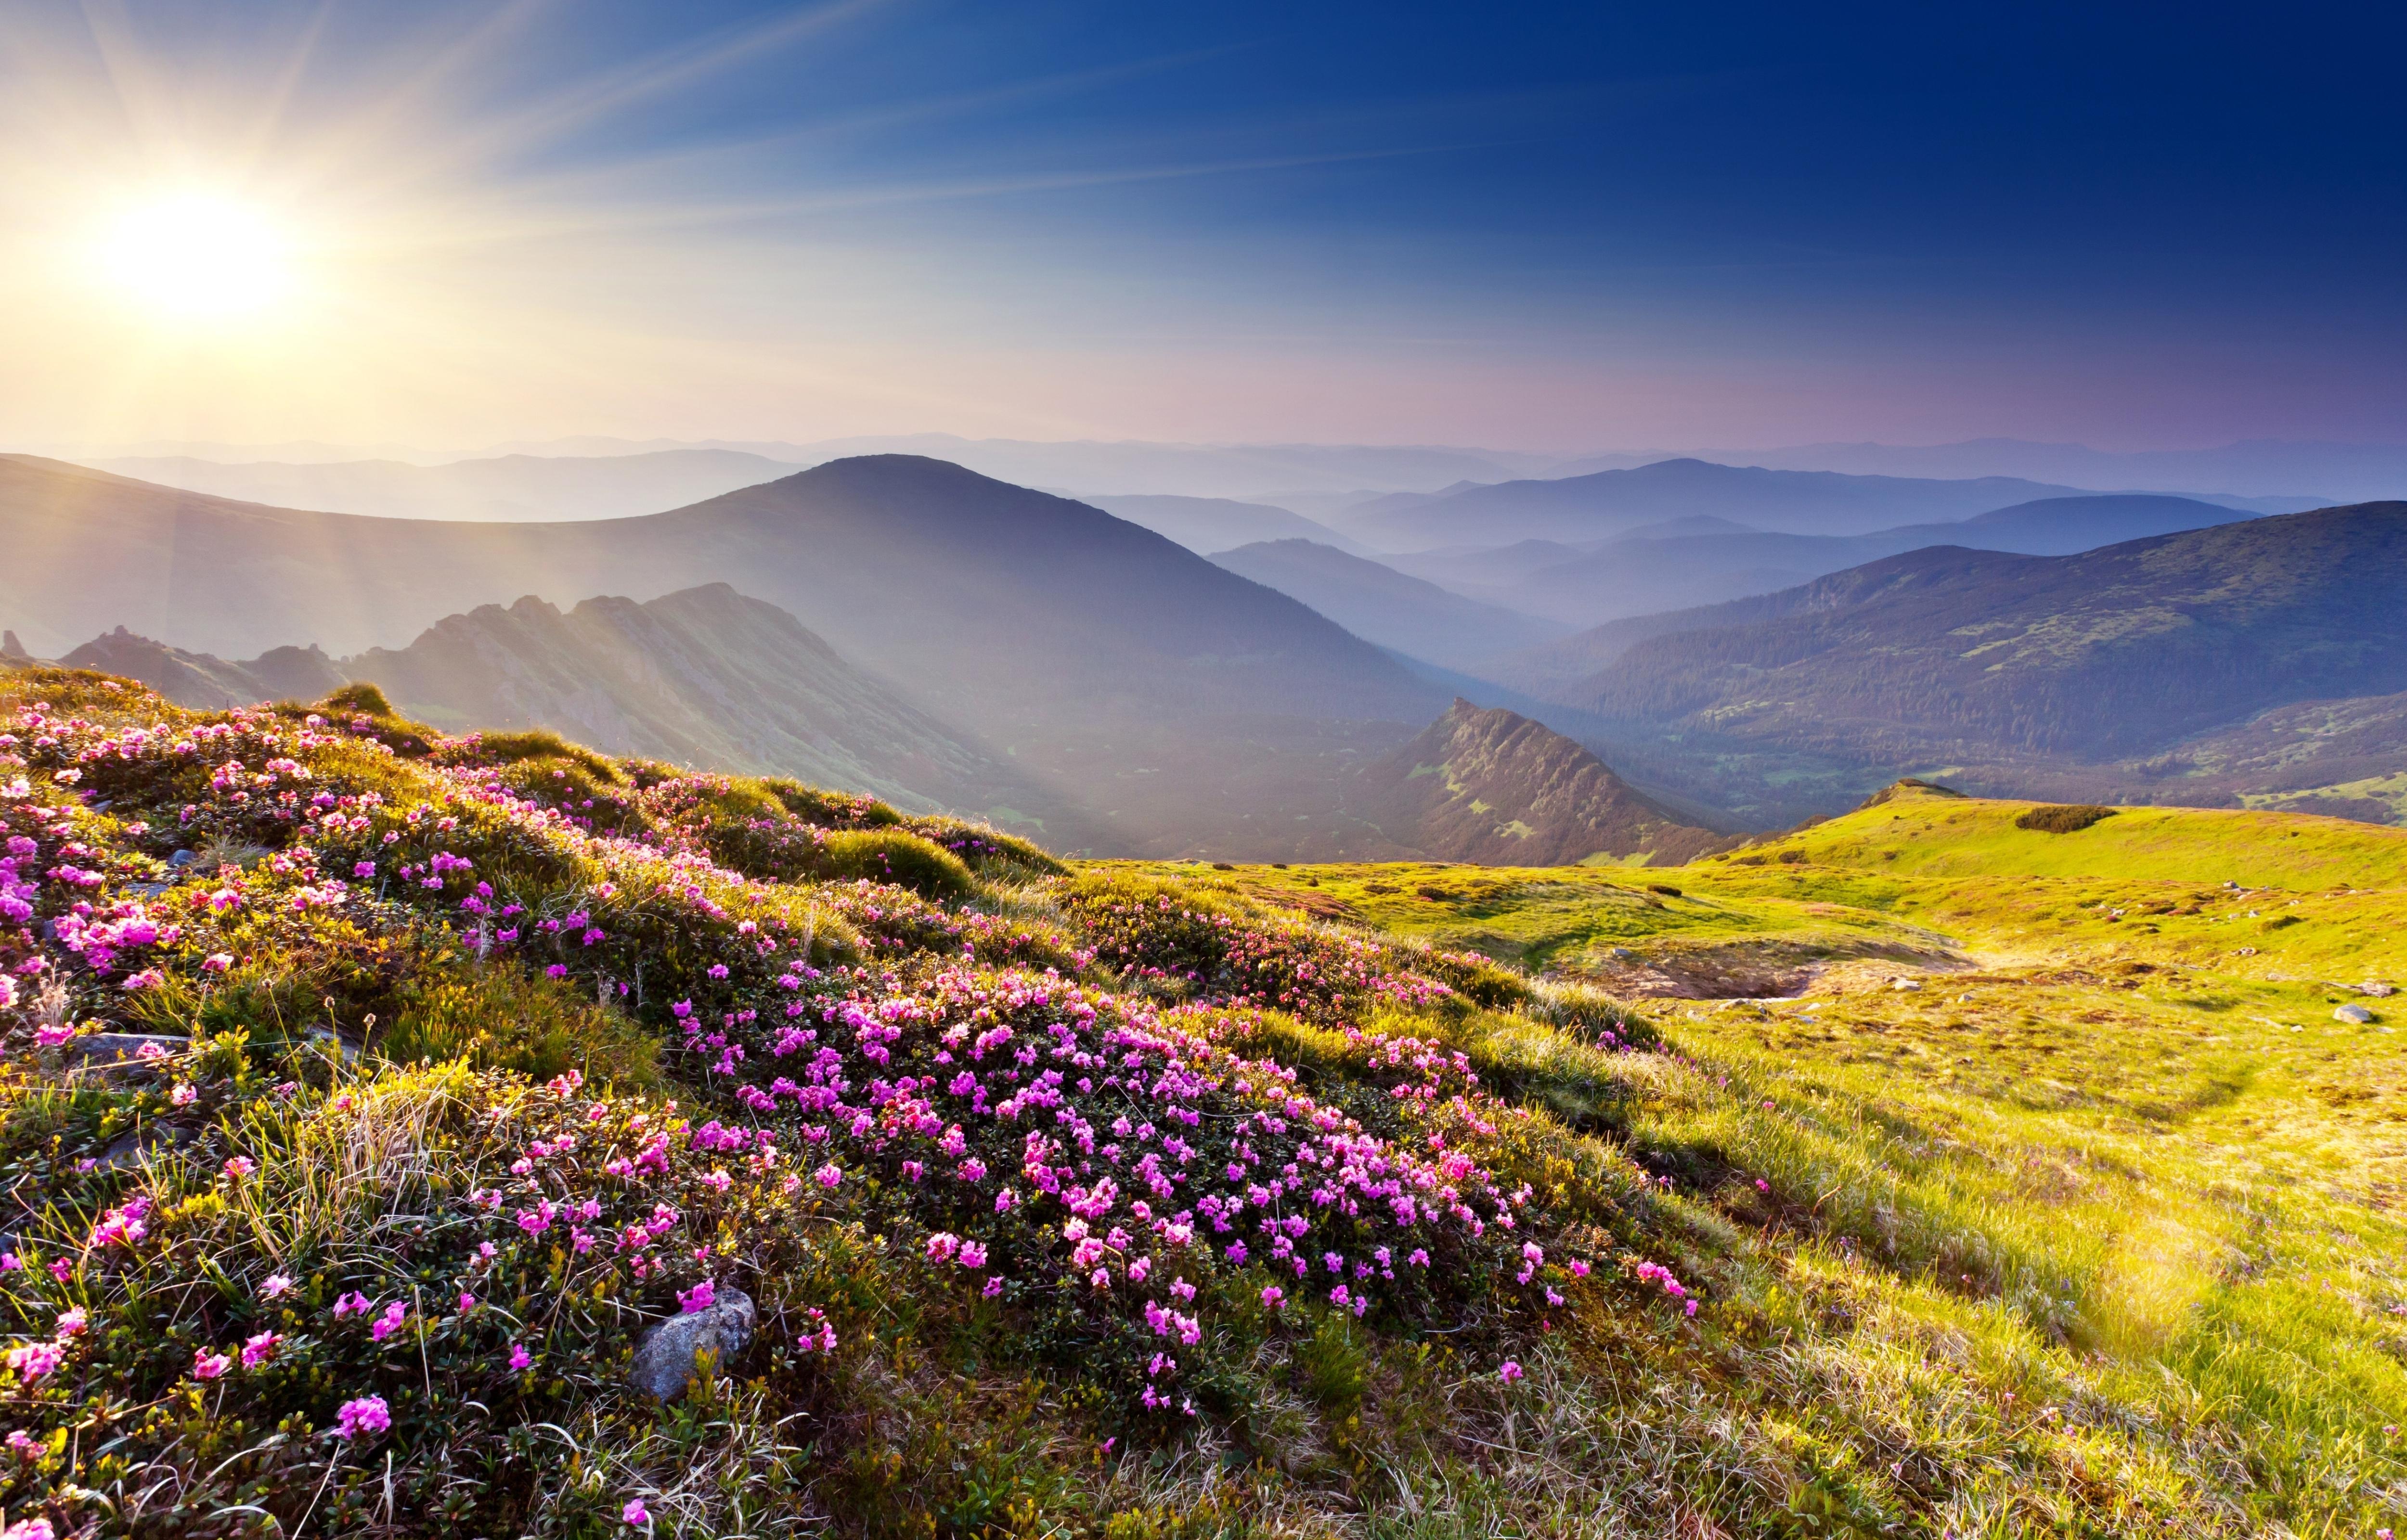 K, #Rhododendron flowers, #Sunset, #Summer mountains